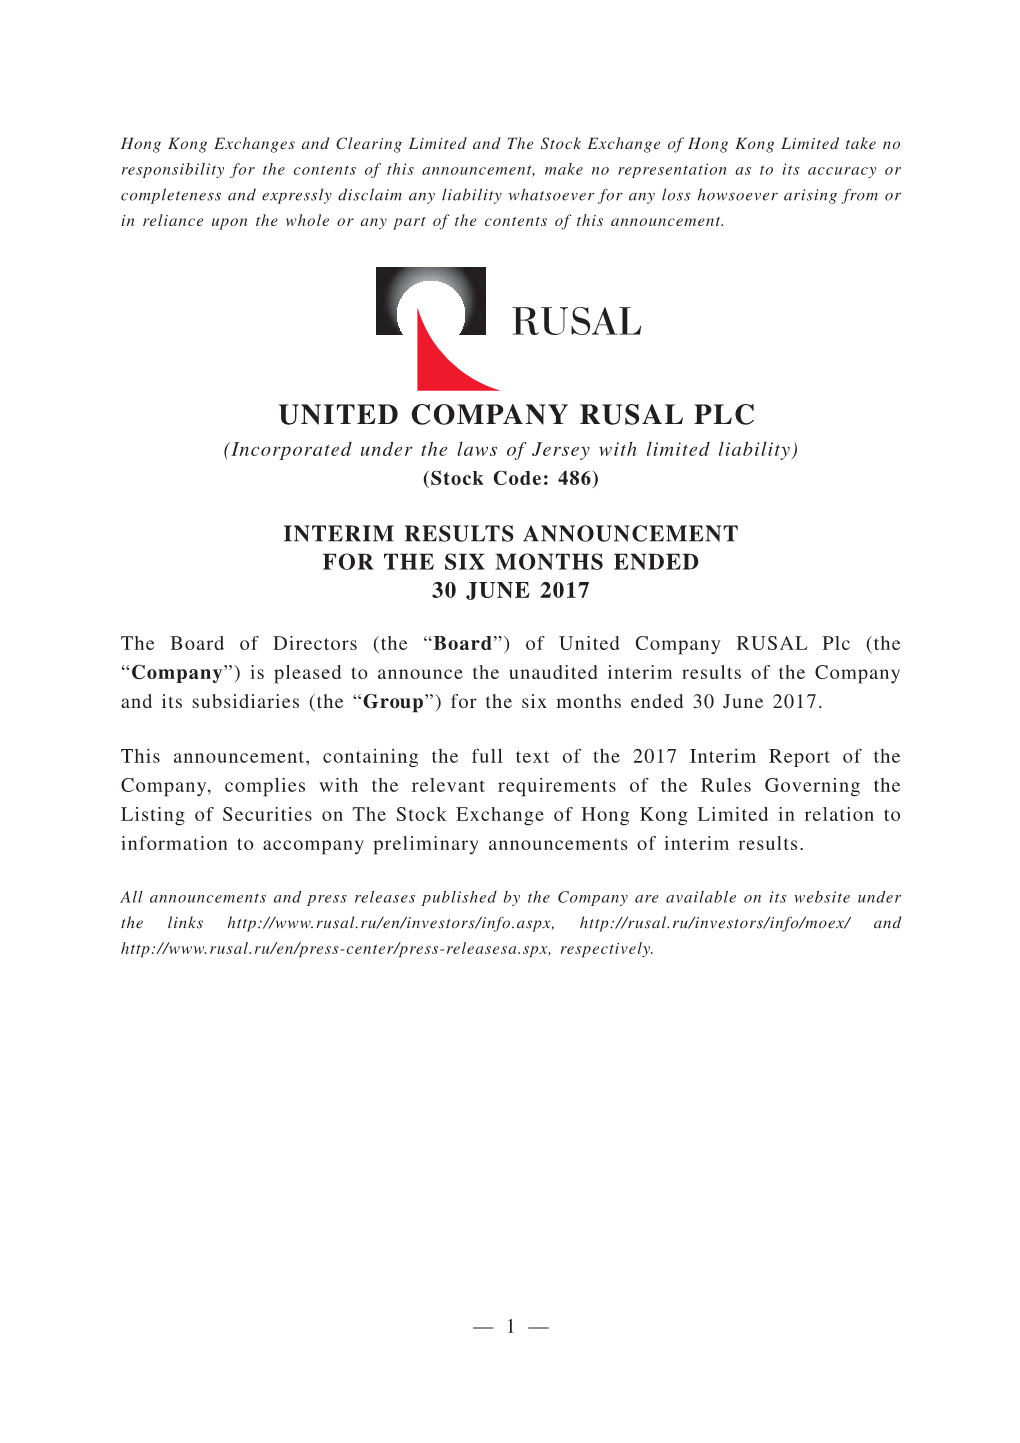 UNITED COMPANY RUSAL PLC (Incorporated Under the Laws of Jersey with Limited Liability) (Stock Code: 486)